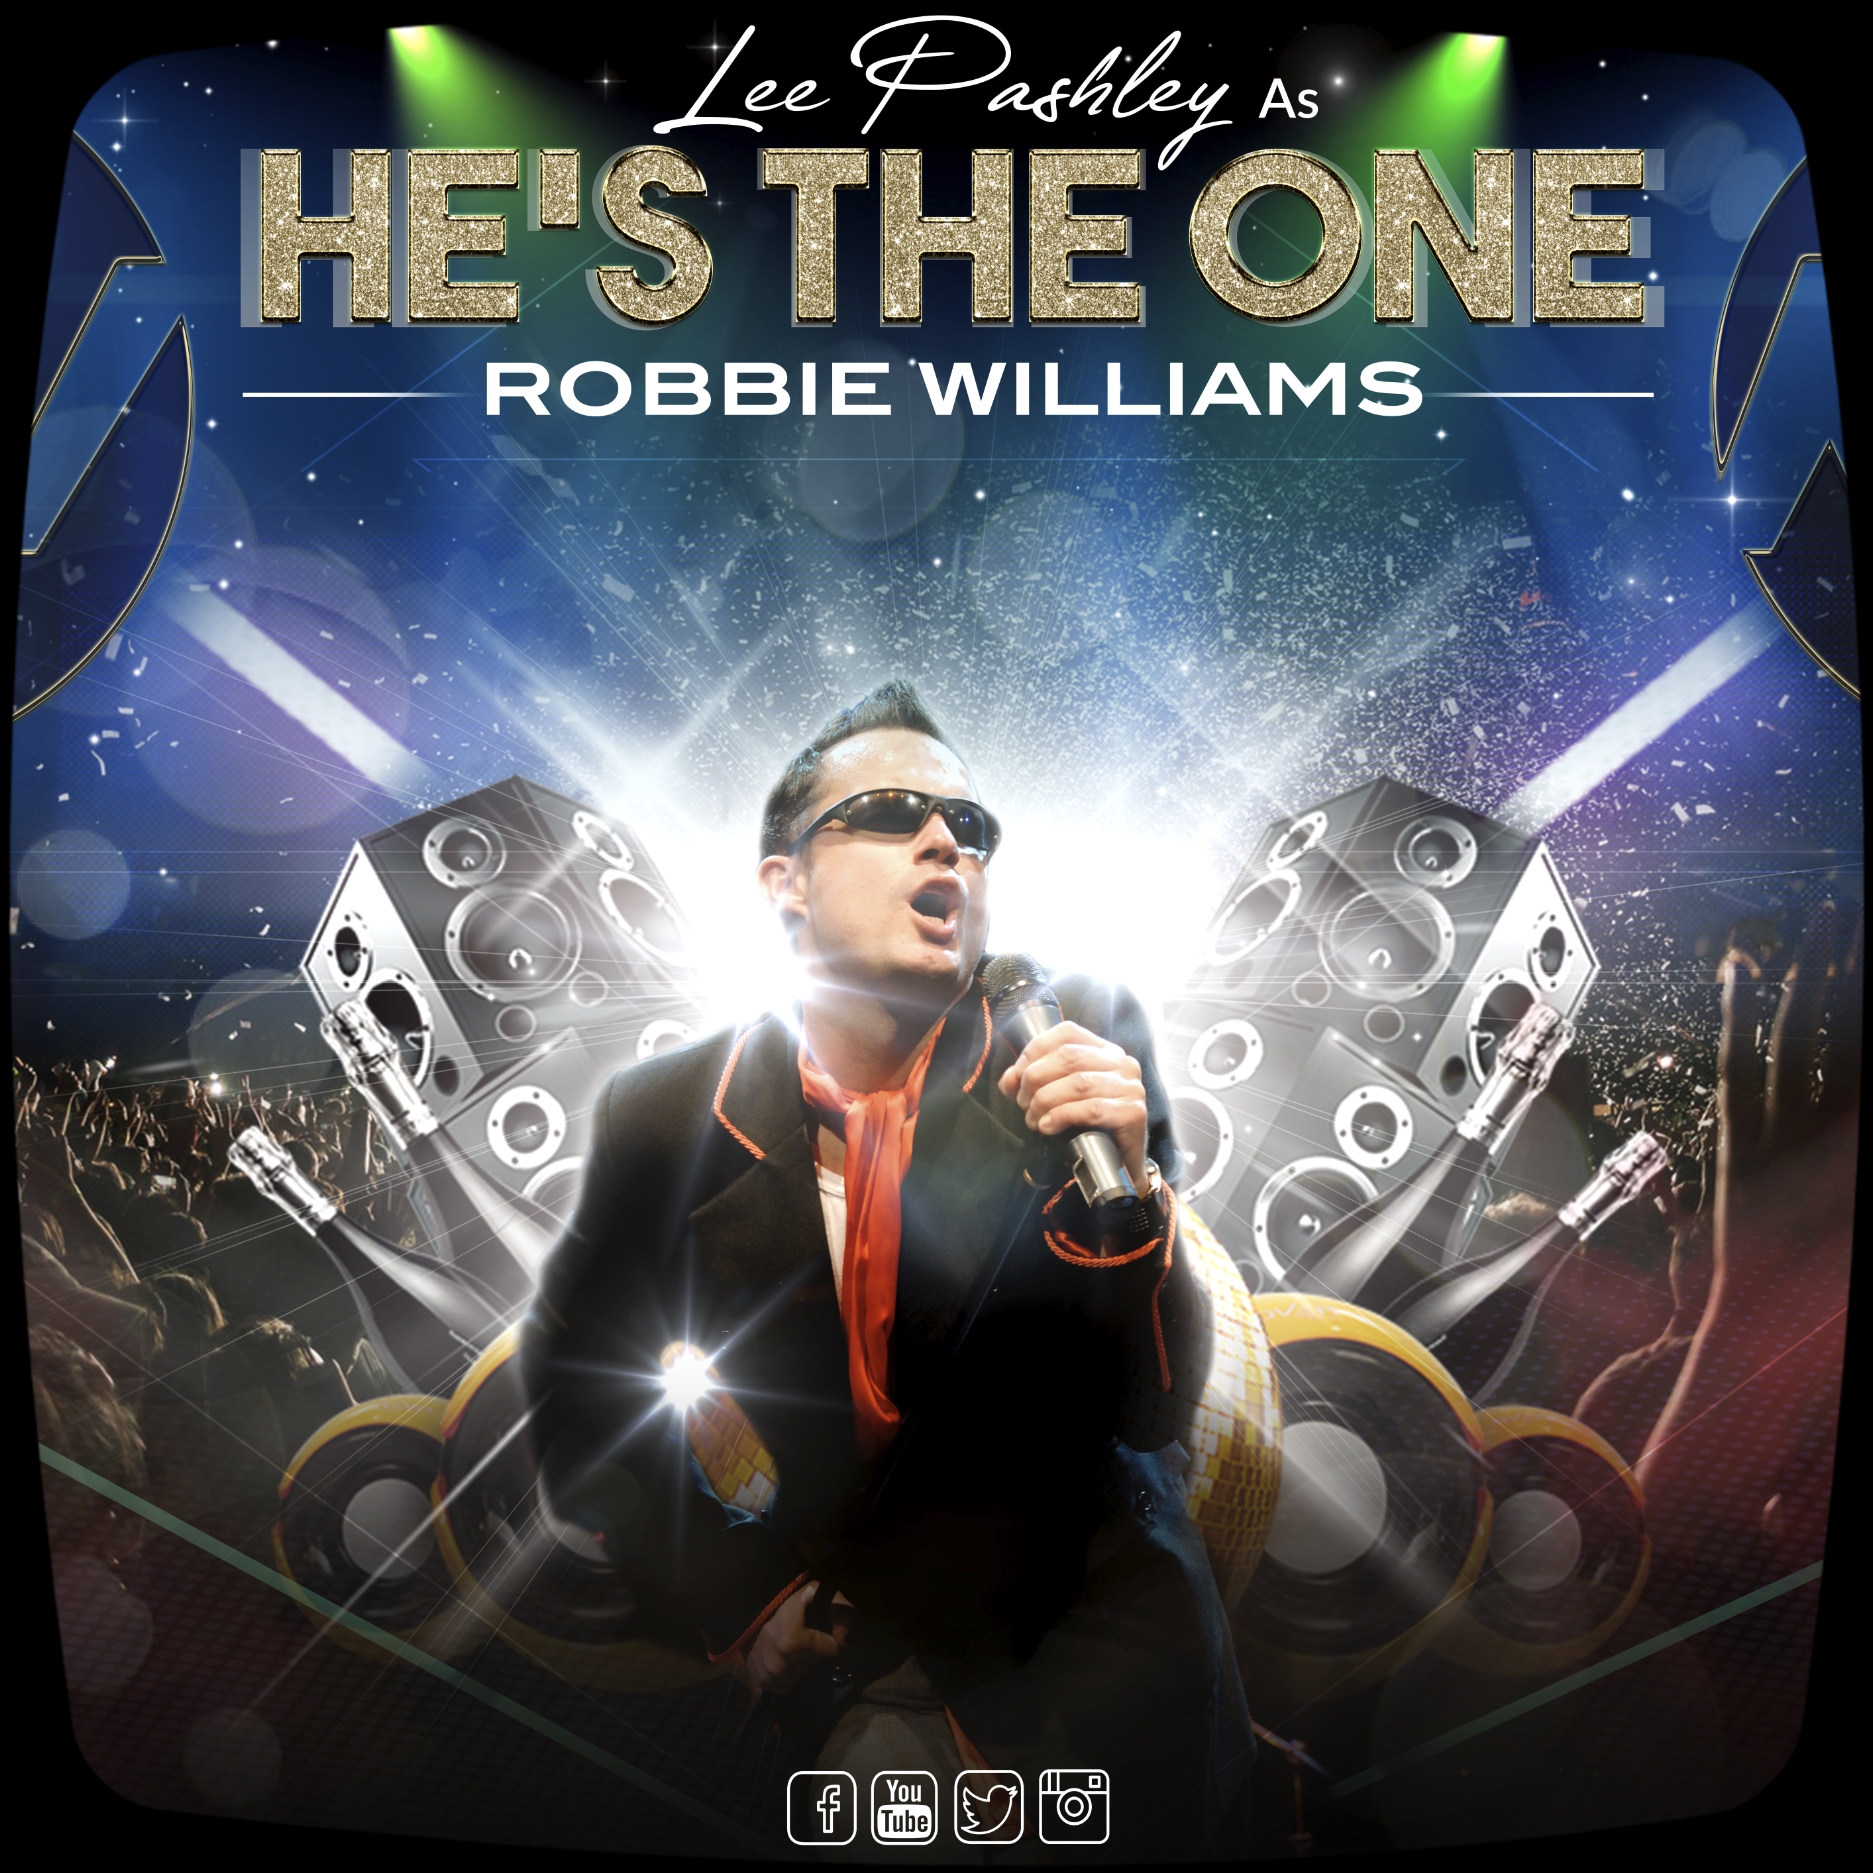 Lee Pashley as 'He's The One' Robbie Williams Tribute